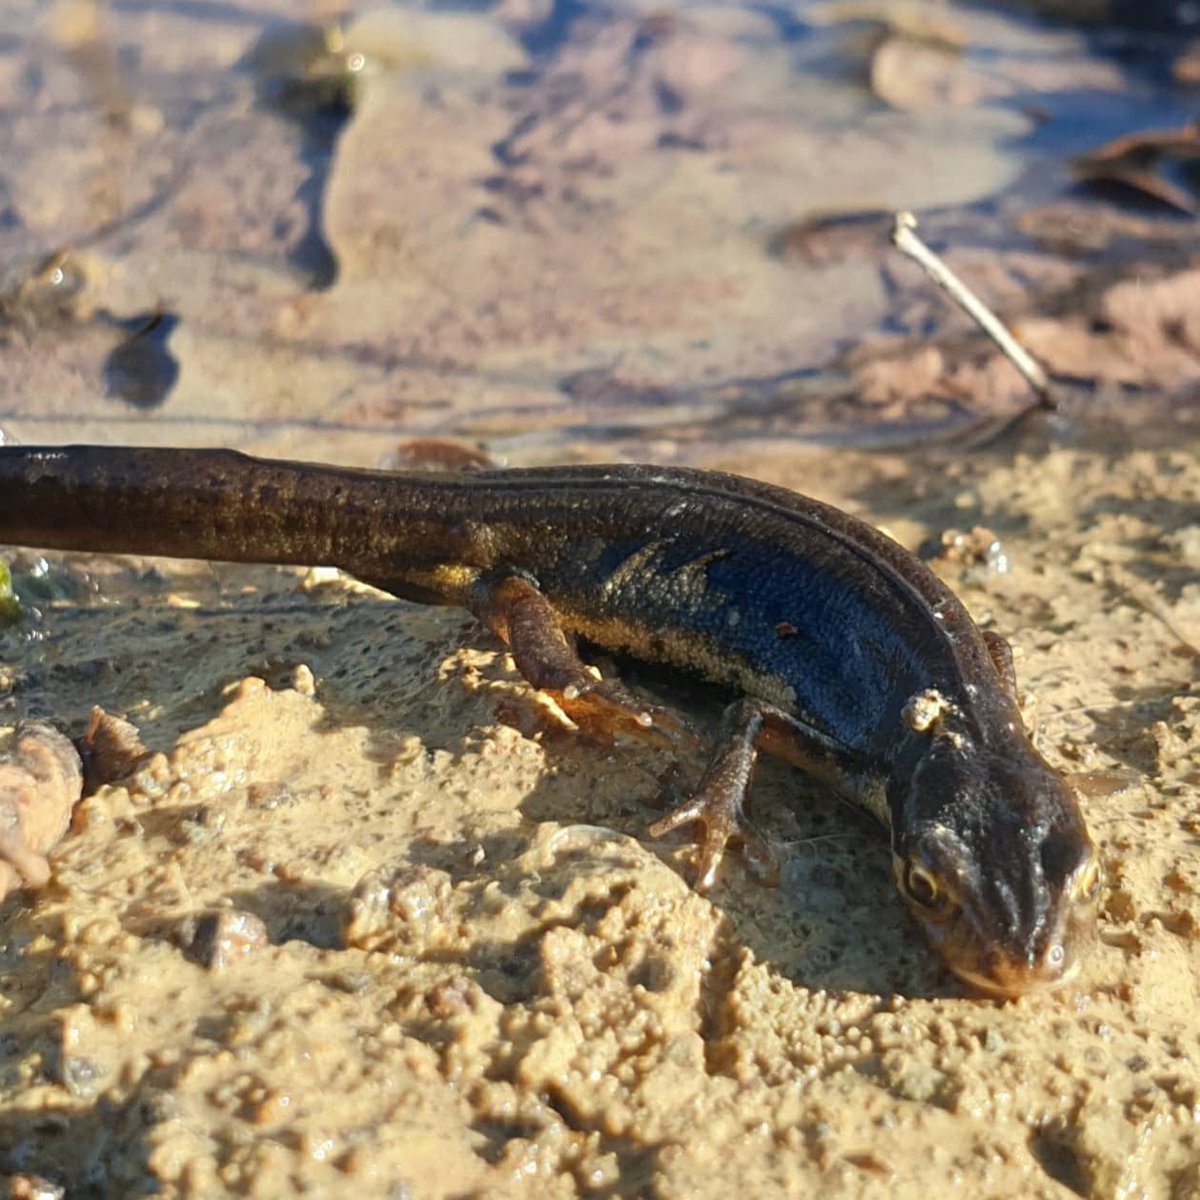 The newts seem to think hibernation is over. Saved this one and two others from a man-hole. #greatcrestednewt #smoothnewt